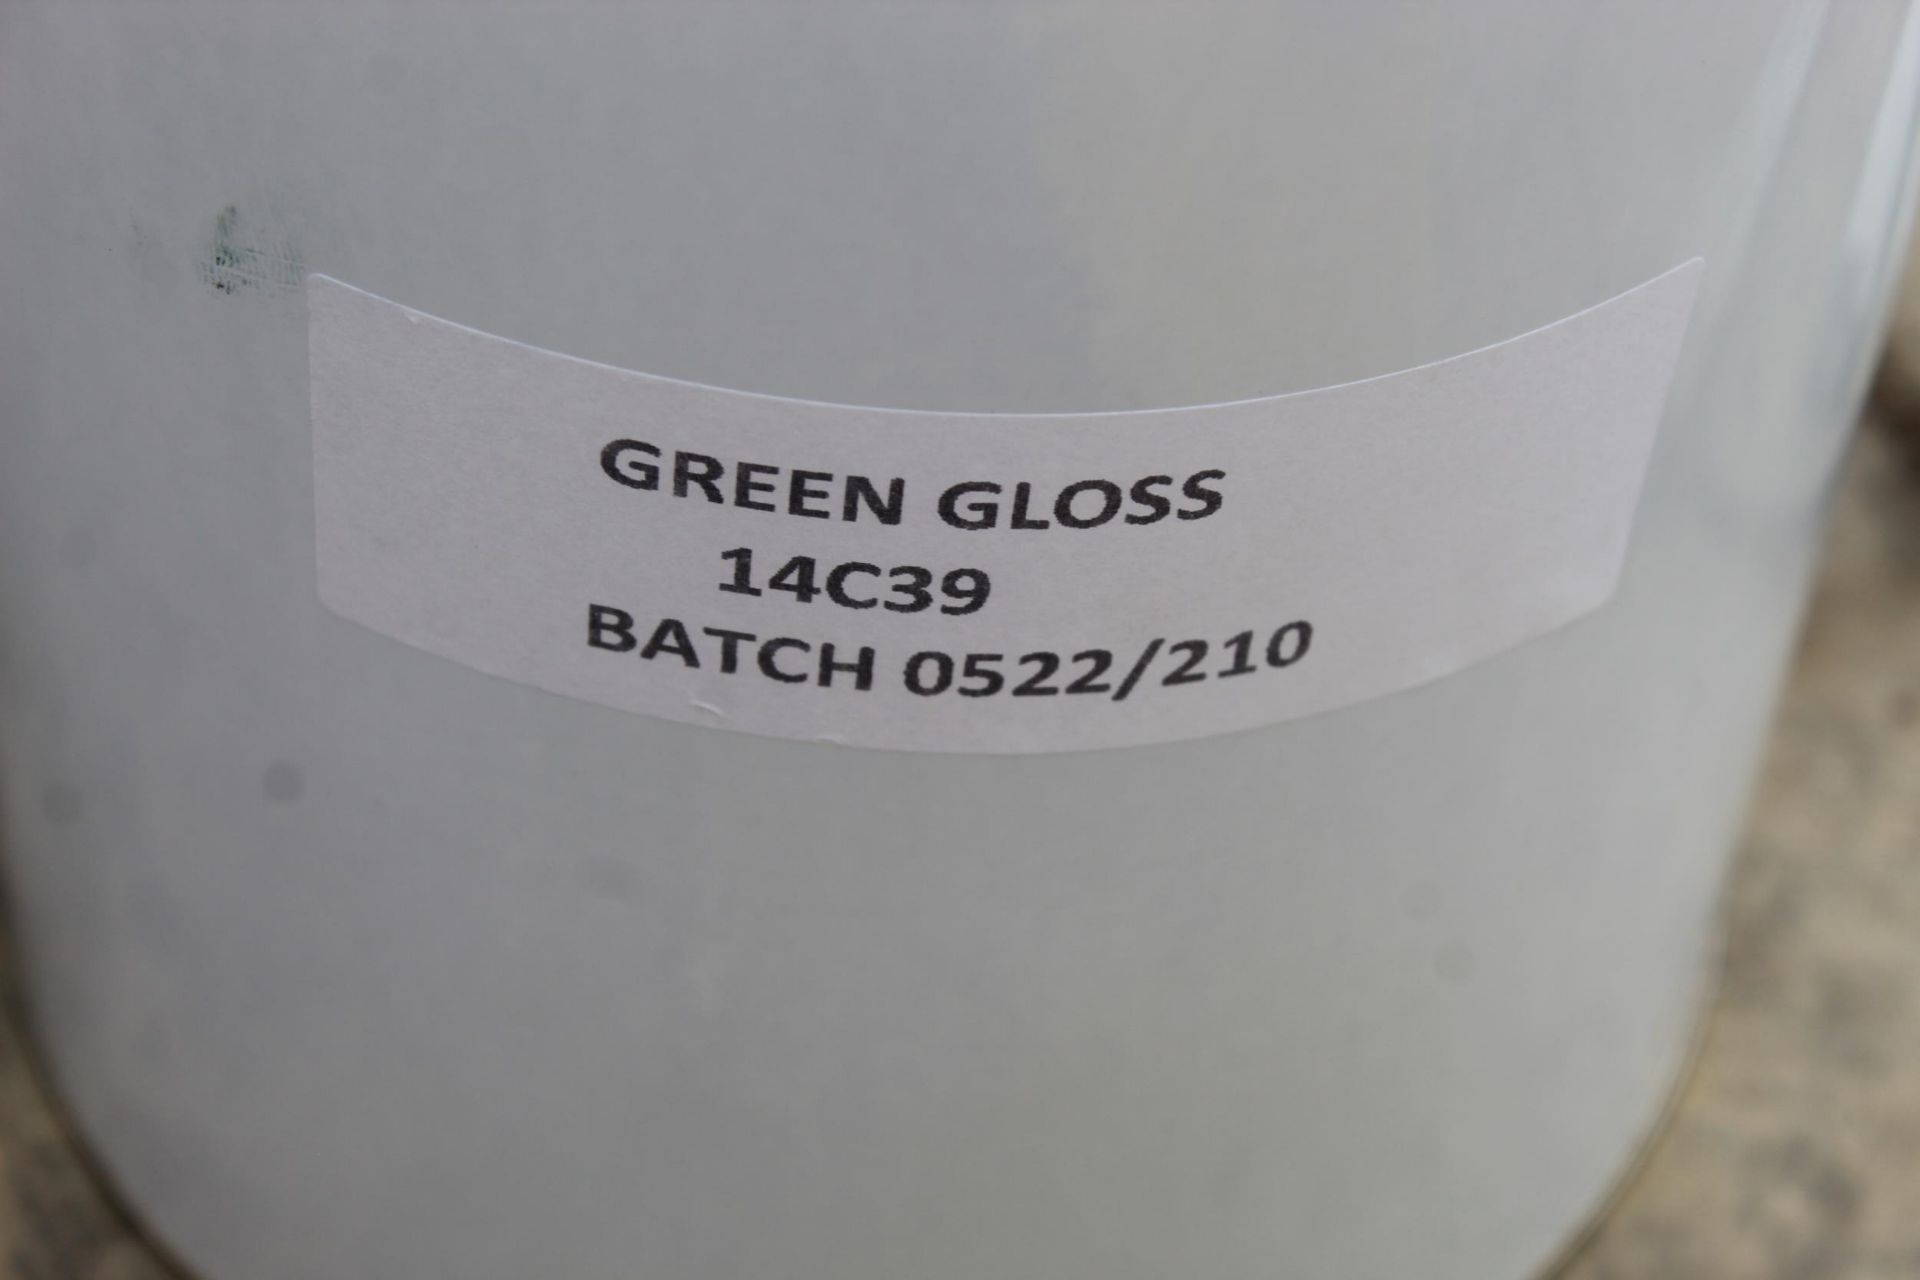 2 TINS OF GREEN GLOSS PAINT + VAT - Image 2 of 2